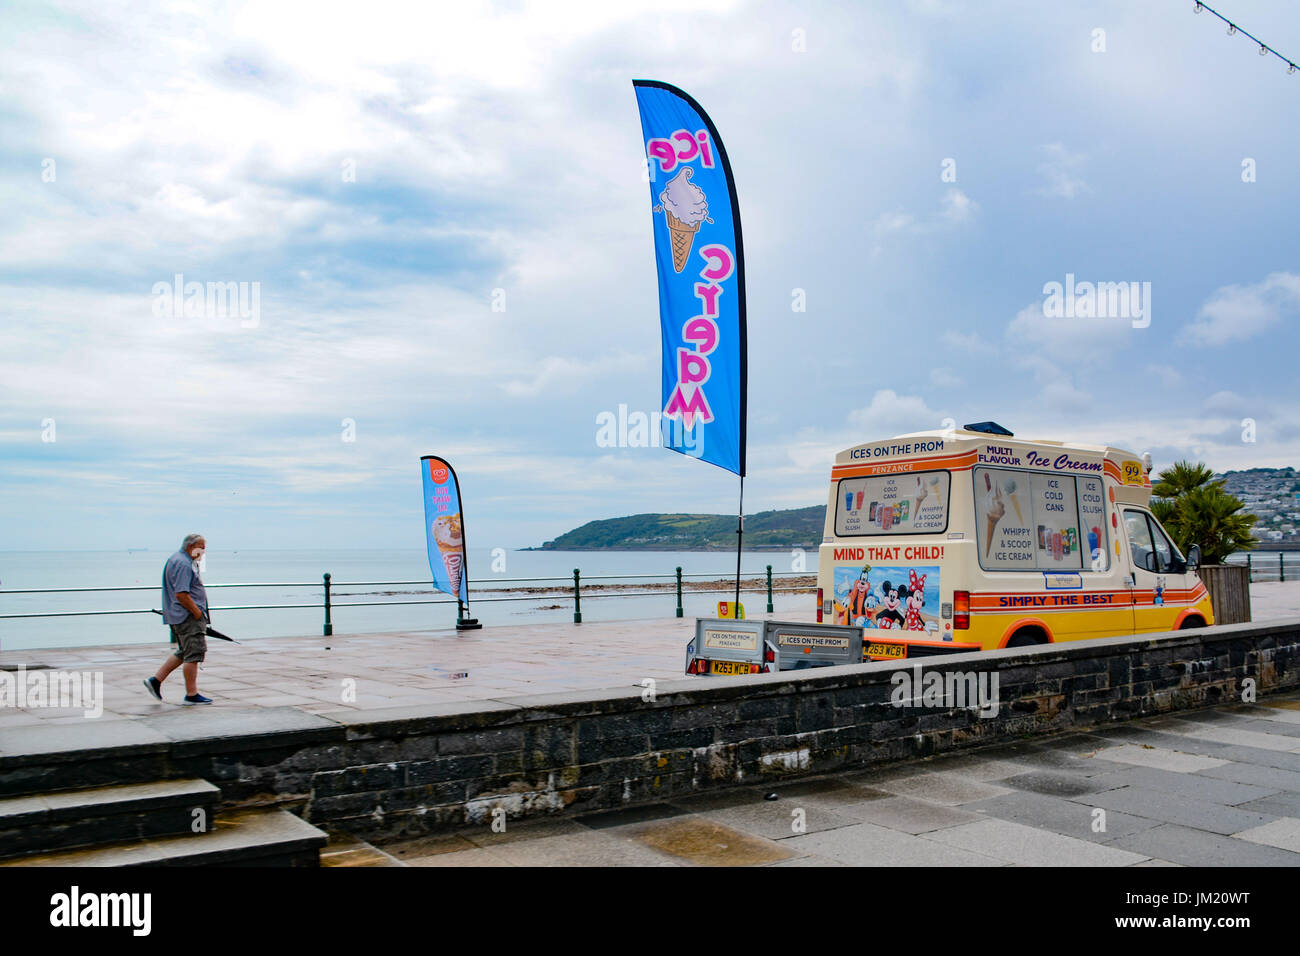 Penzance, Cornwall, UK. 25th July 2017. UK Weather. After a hot monday, the showers returned to Cornwall today - even though it was still warm. The outdoor lido pool was quiet for a summers day, as was the ice cream van on the sea front. Credit: cwallpix/Alamy Live News Stock Photo